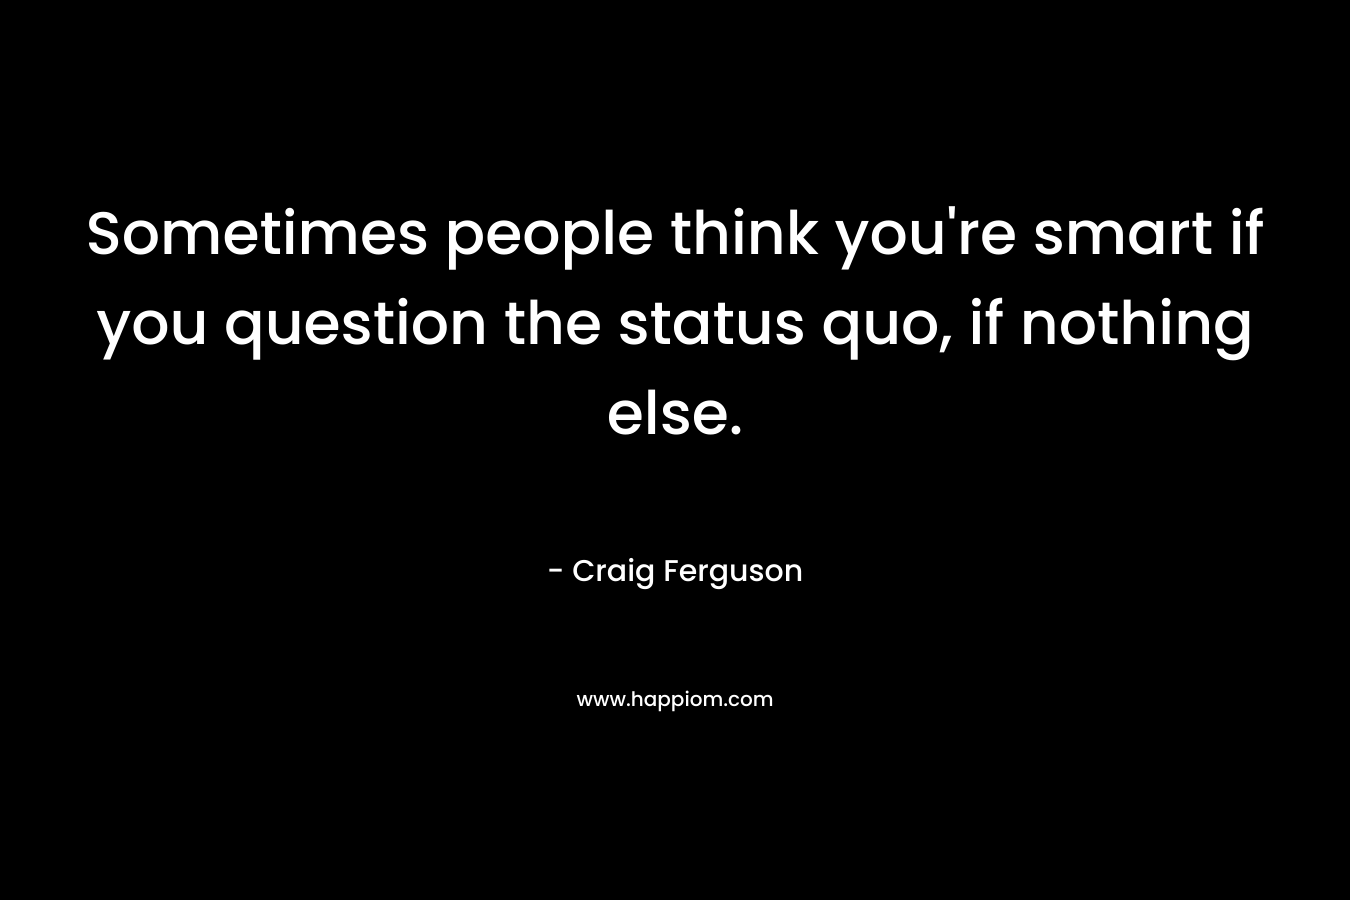 Sometimes people think you're smart if you question the status quo, if nothing else.